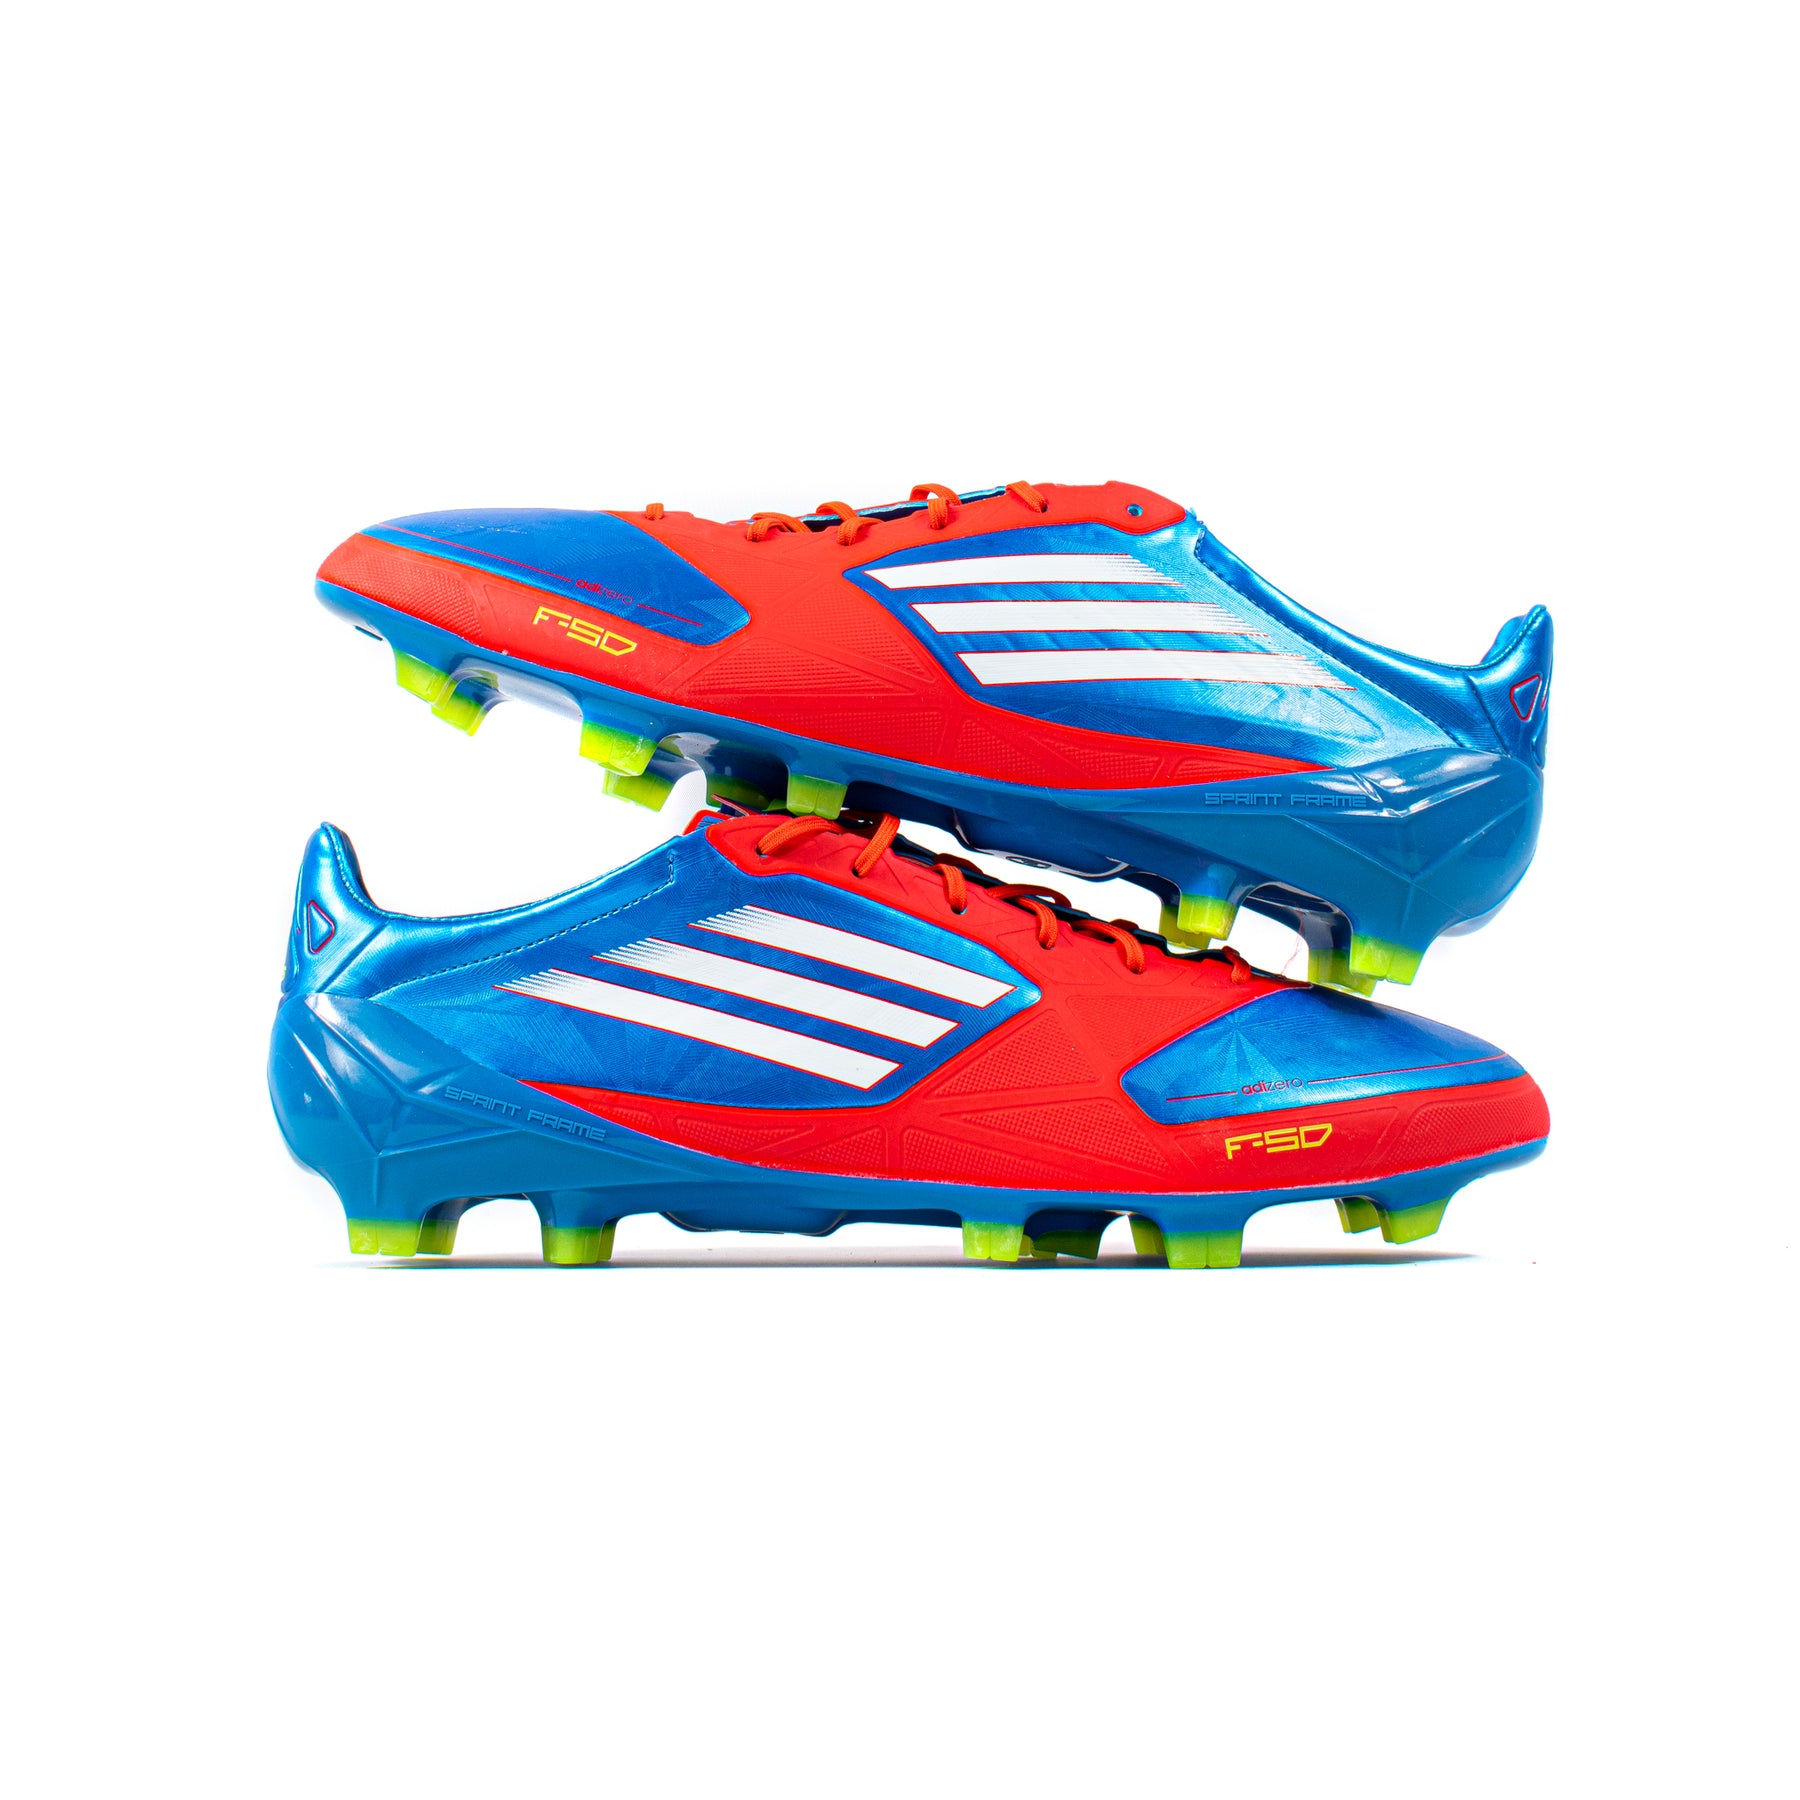 bestrating Symptomen Op tijd Adidas F50 Adizero Blue Red Synthetic FG – Classic Soccer Cleats